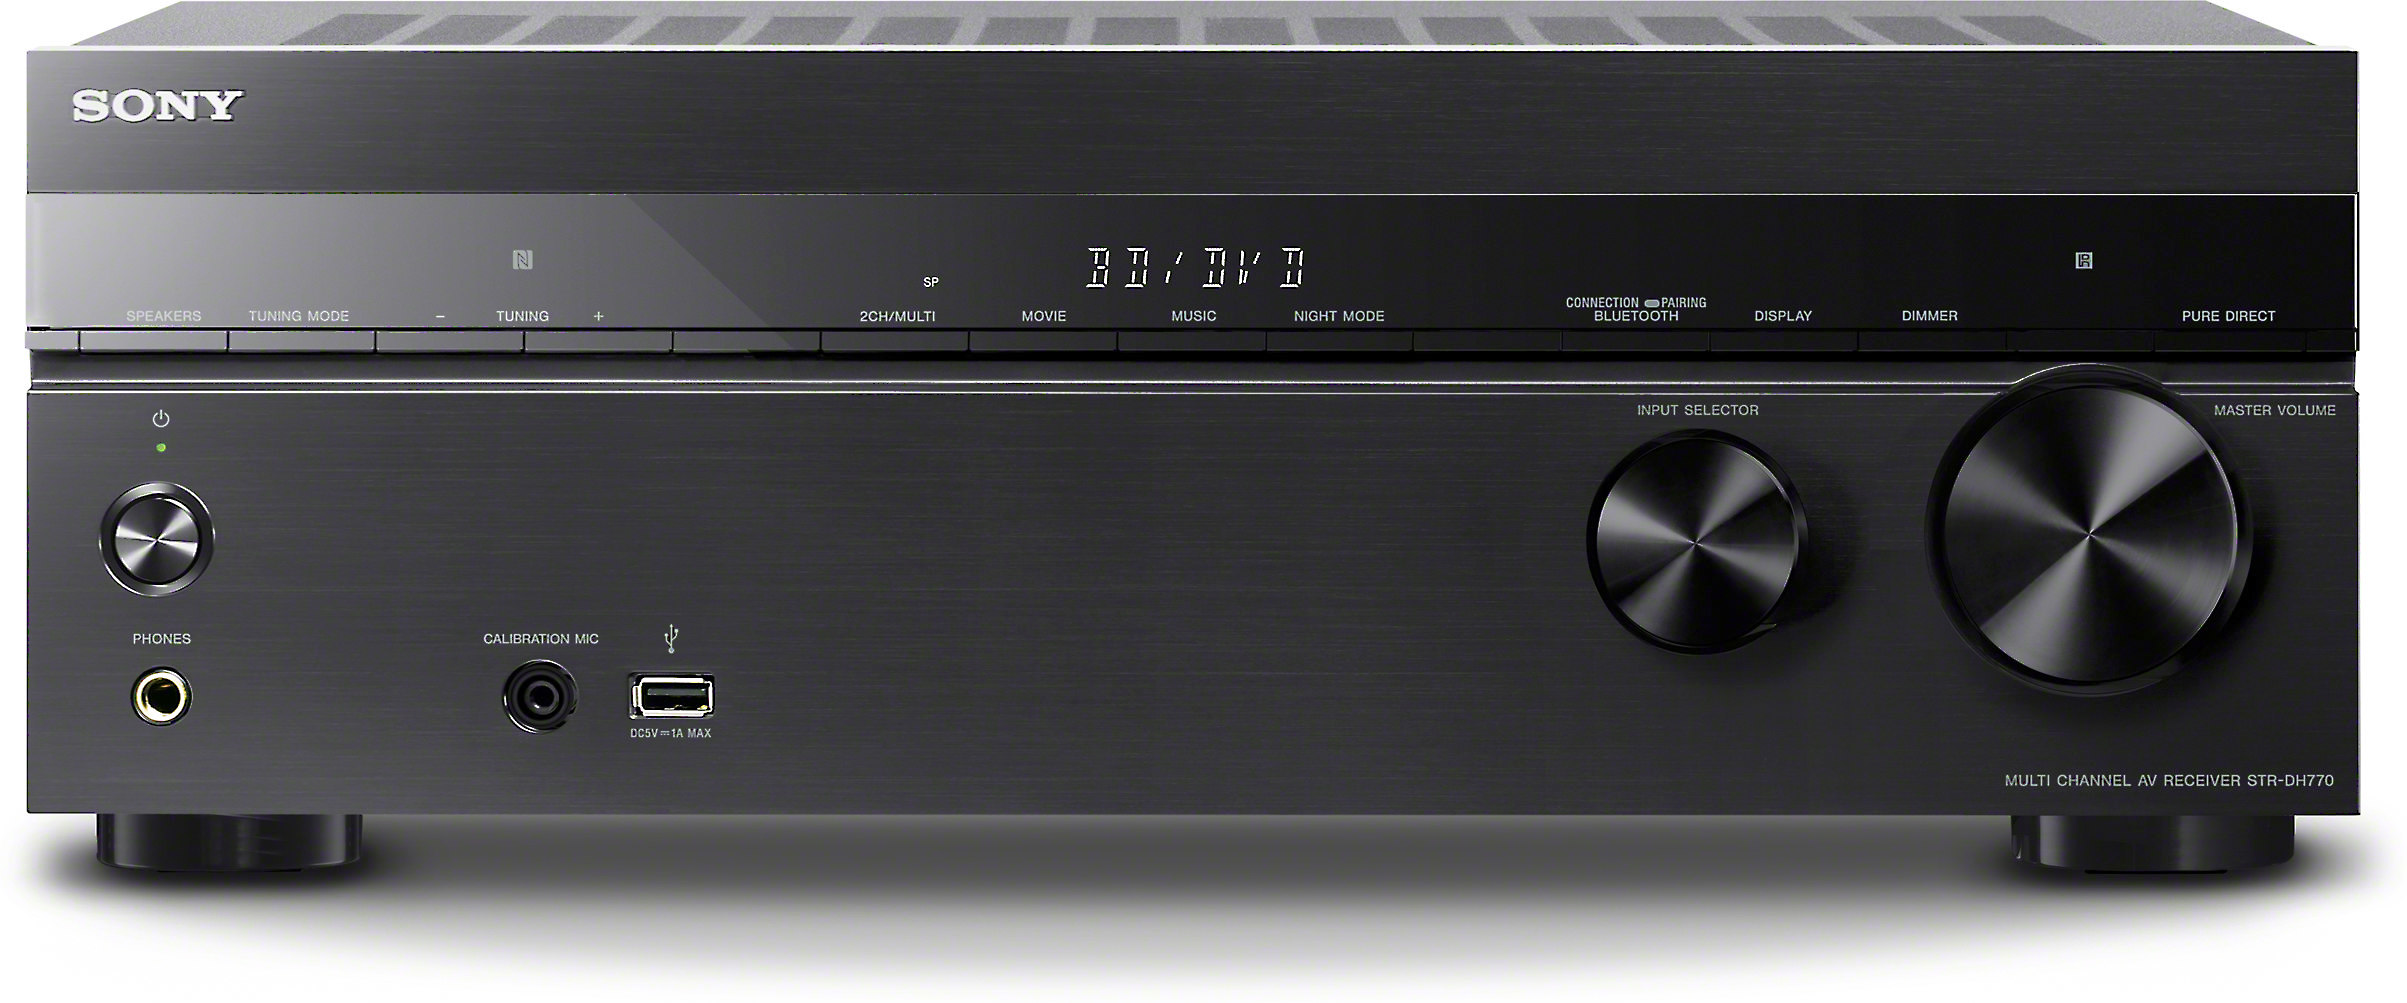 Customer Reviews: Sony STR-DH770 7.2-channel home theater receiver